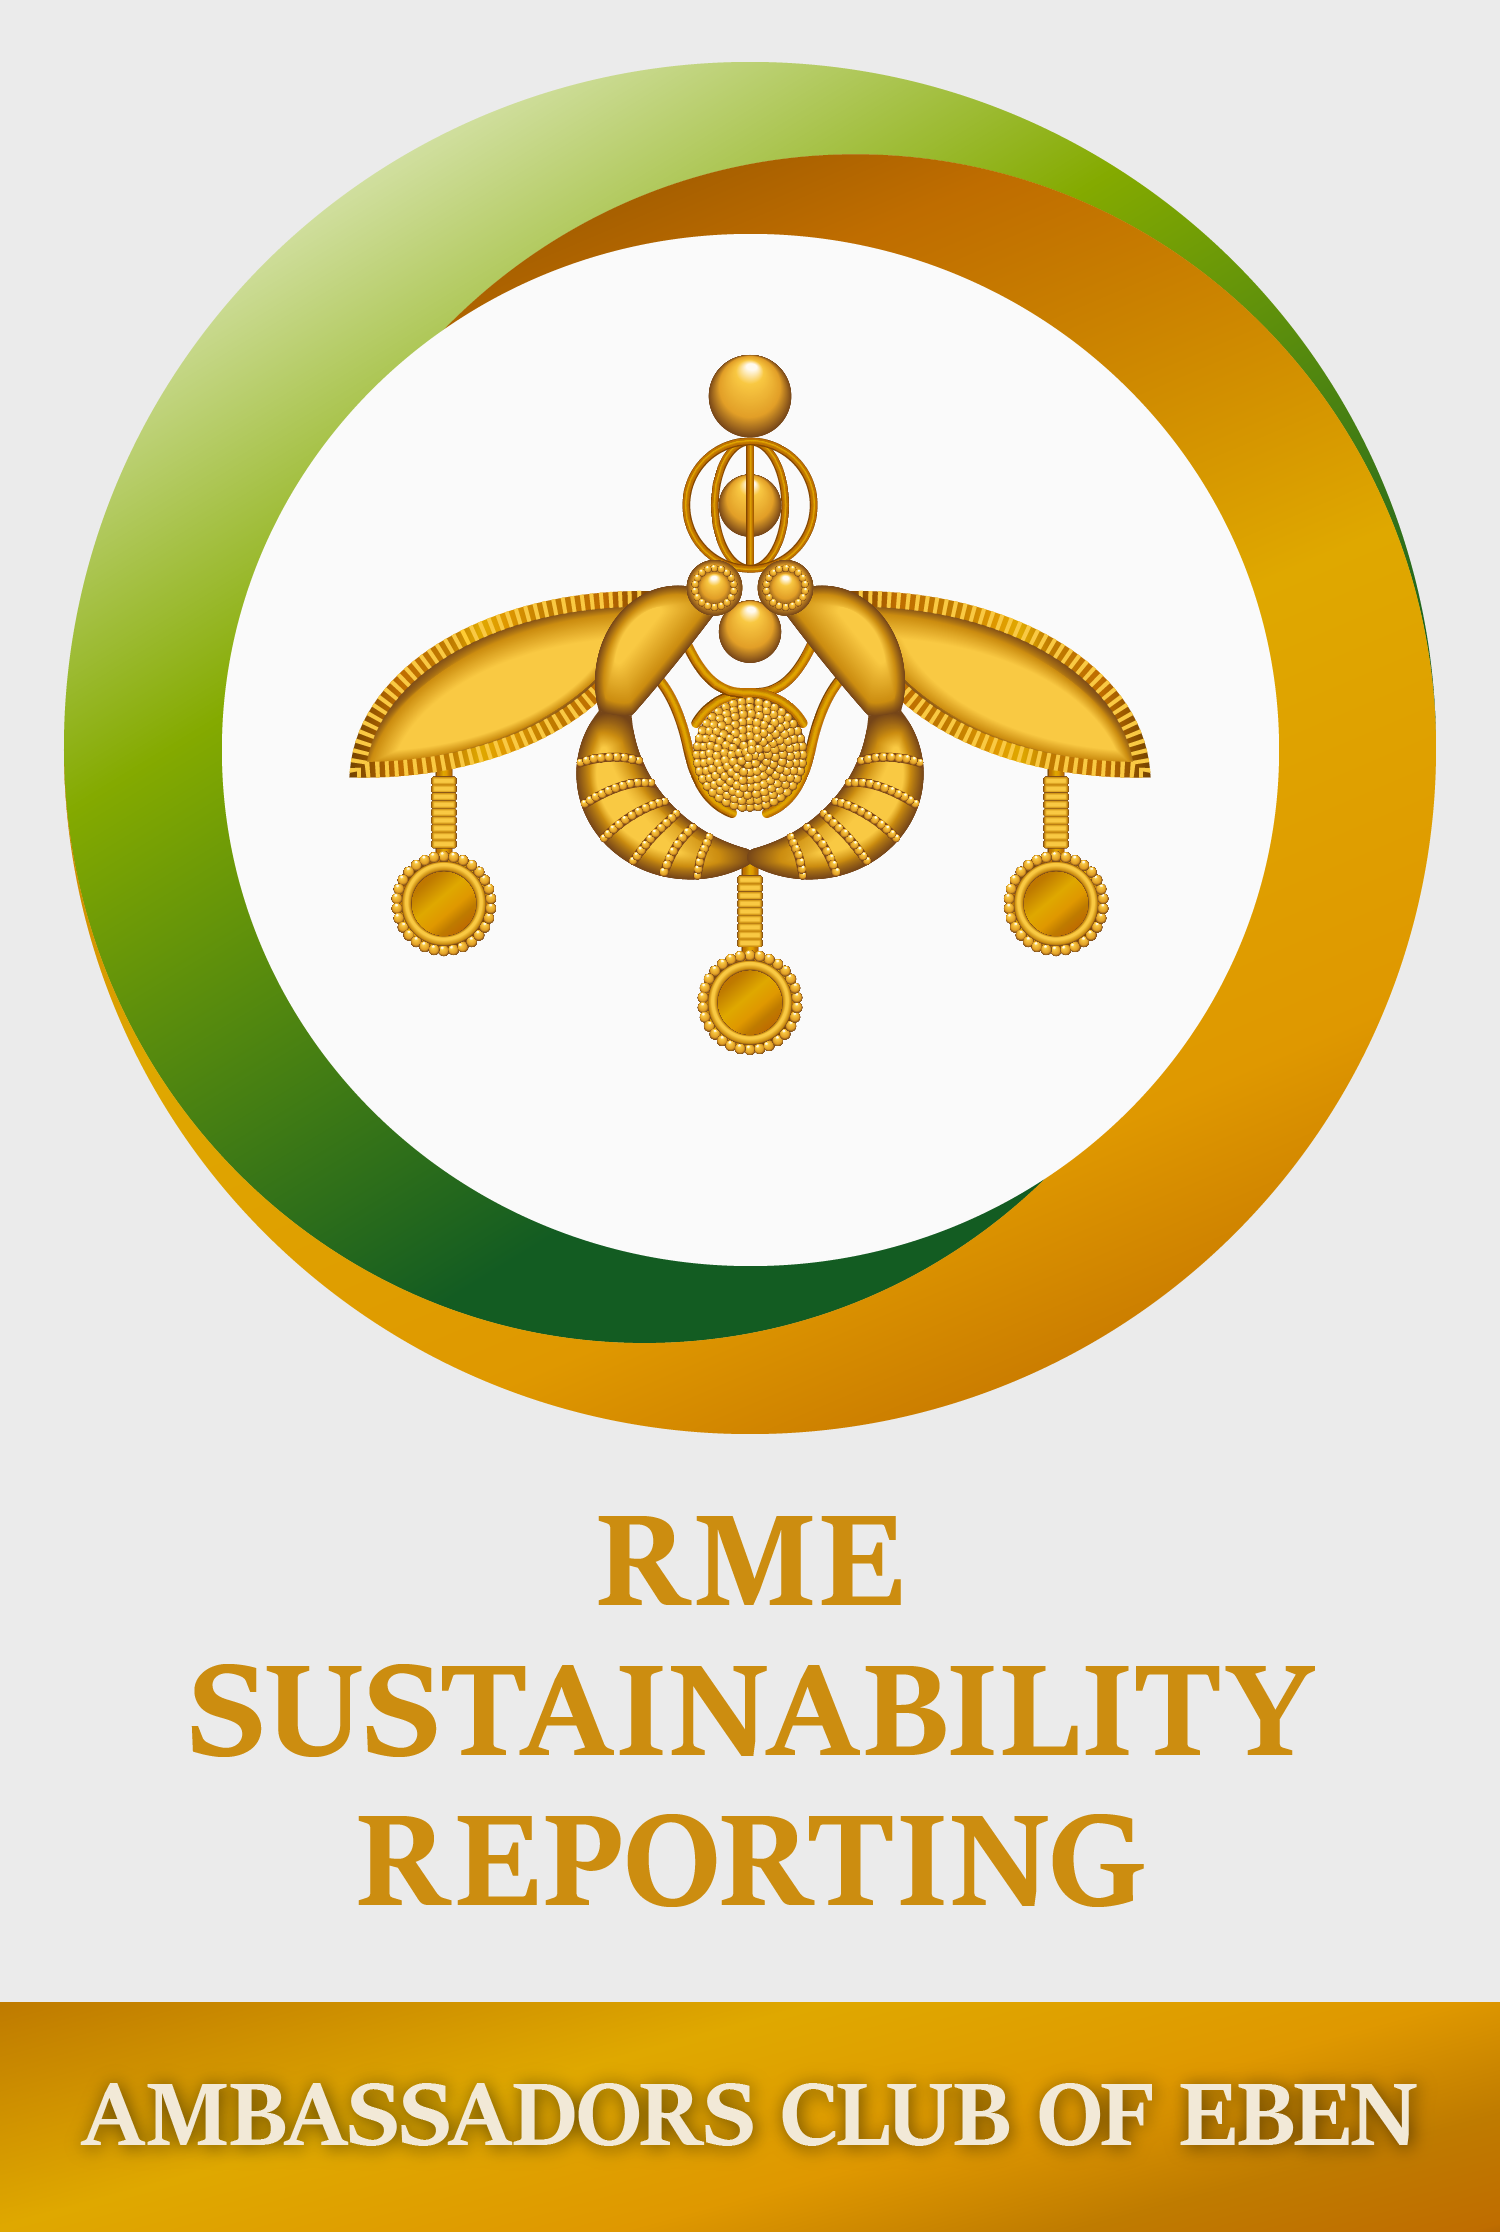 RME SUSTAINABILITY REPORTING